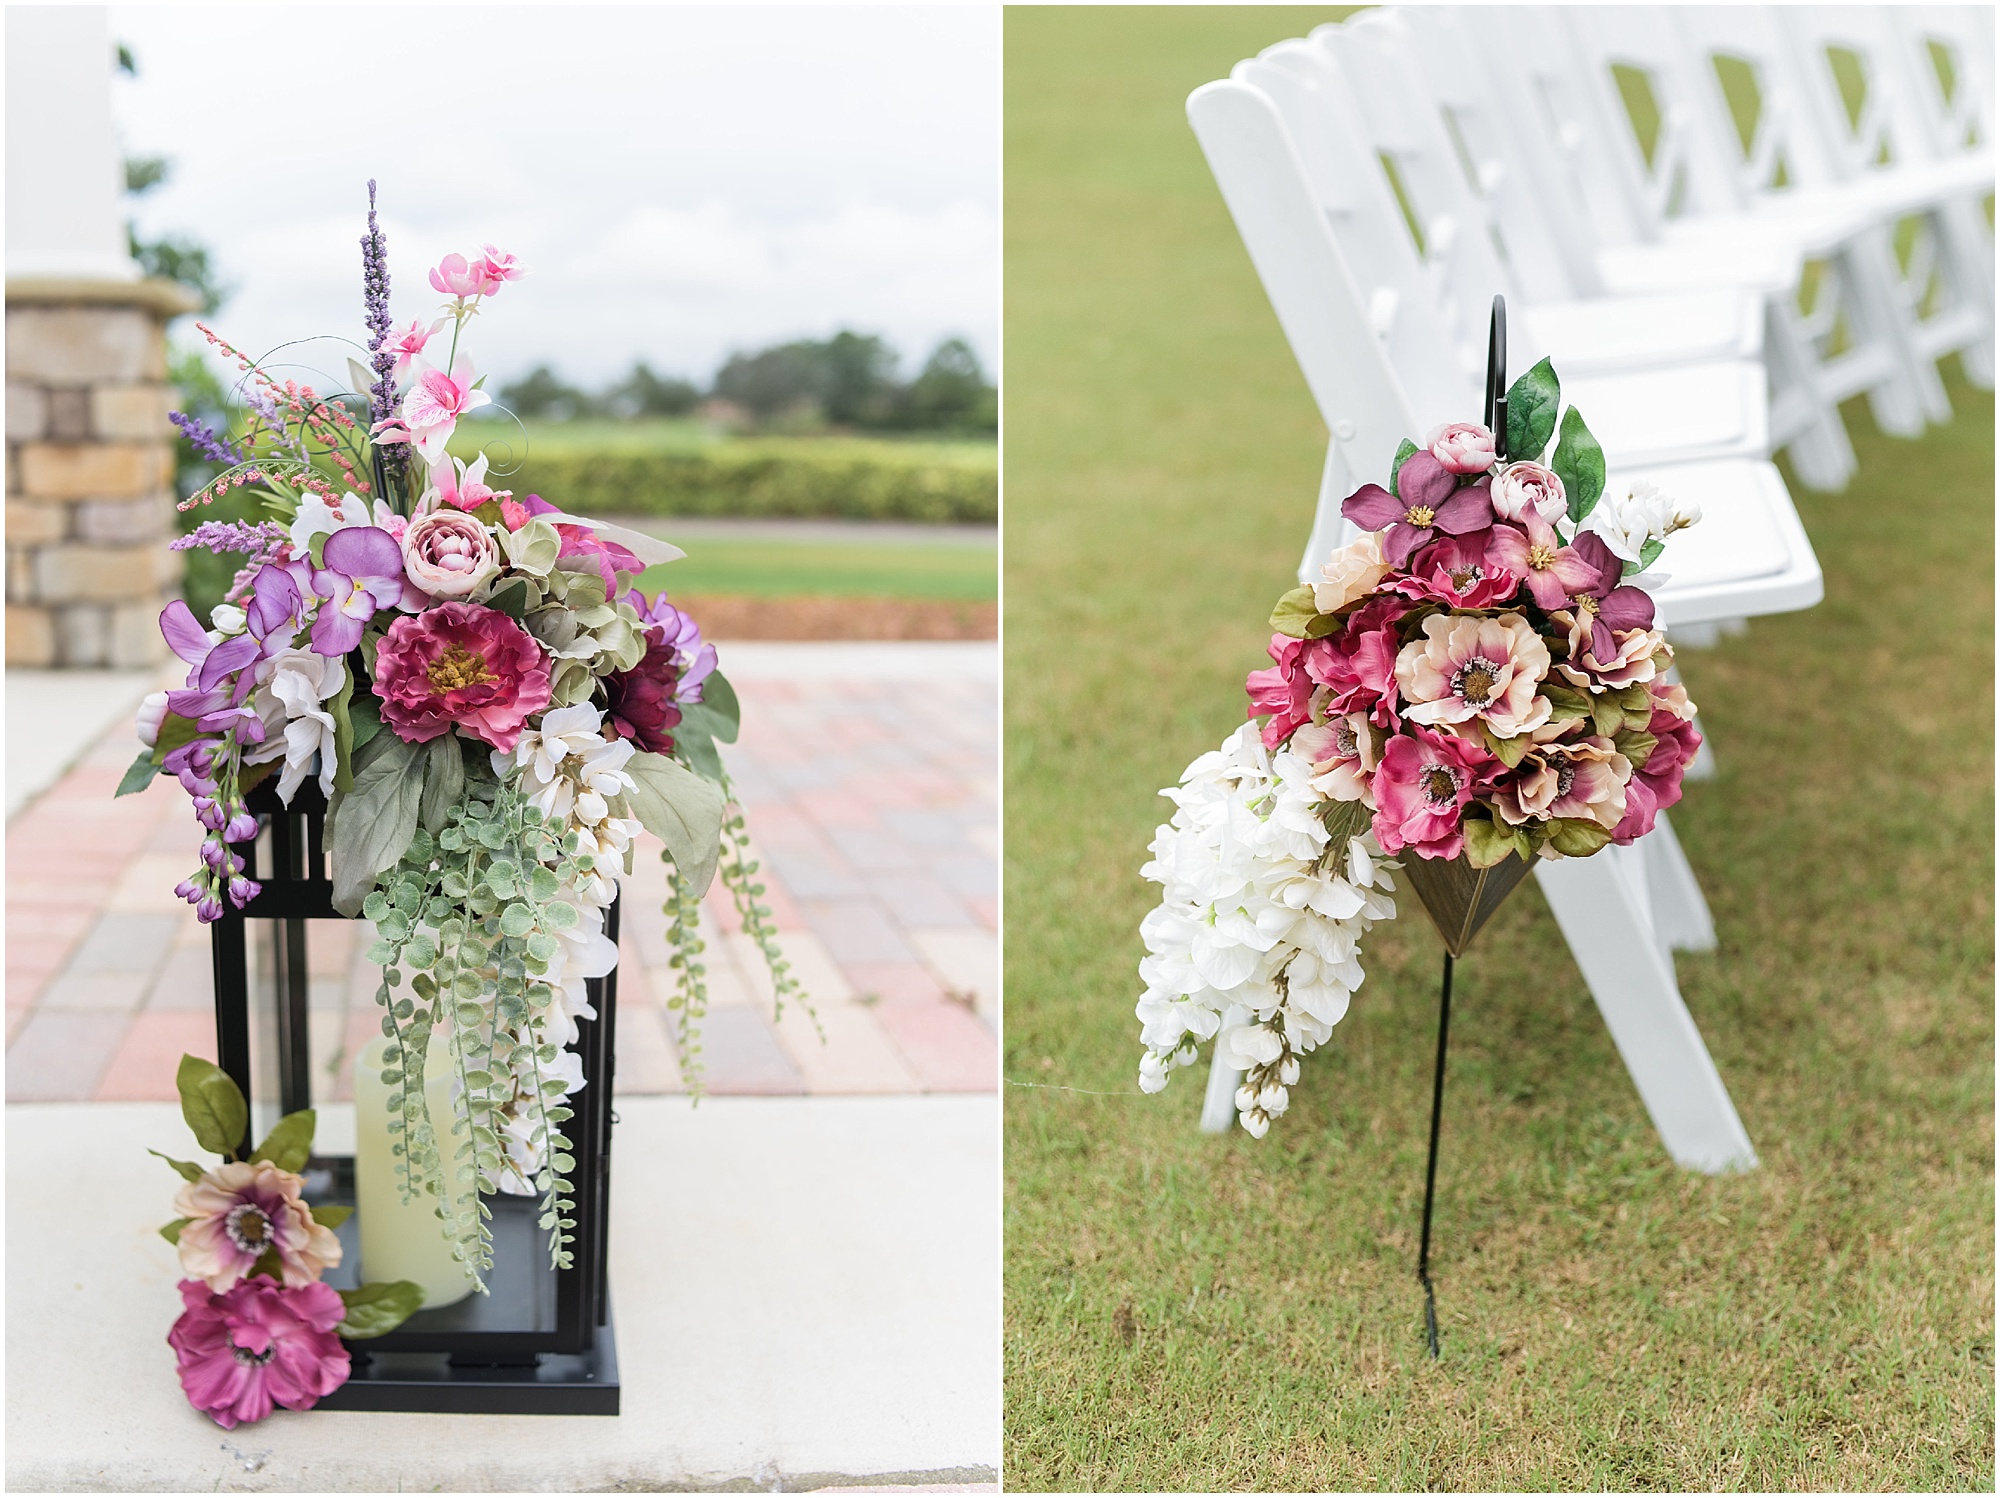 Floral ceremony decorations in shades of pink and purple. 